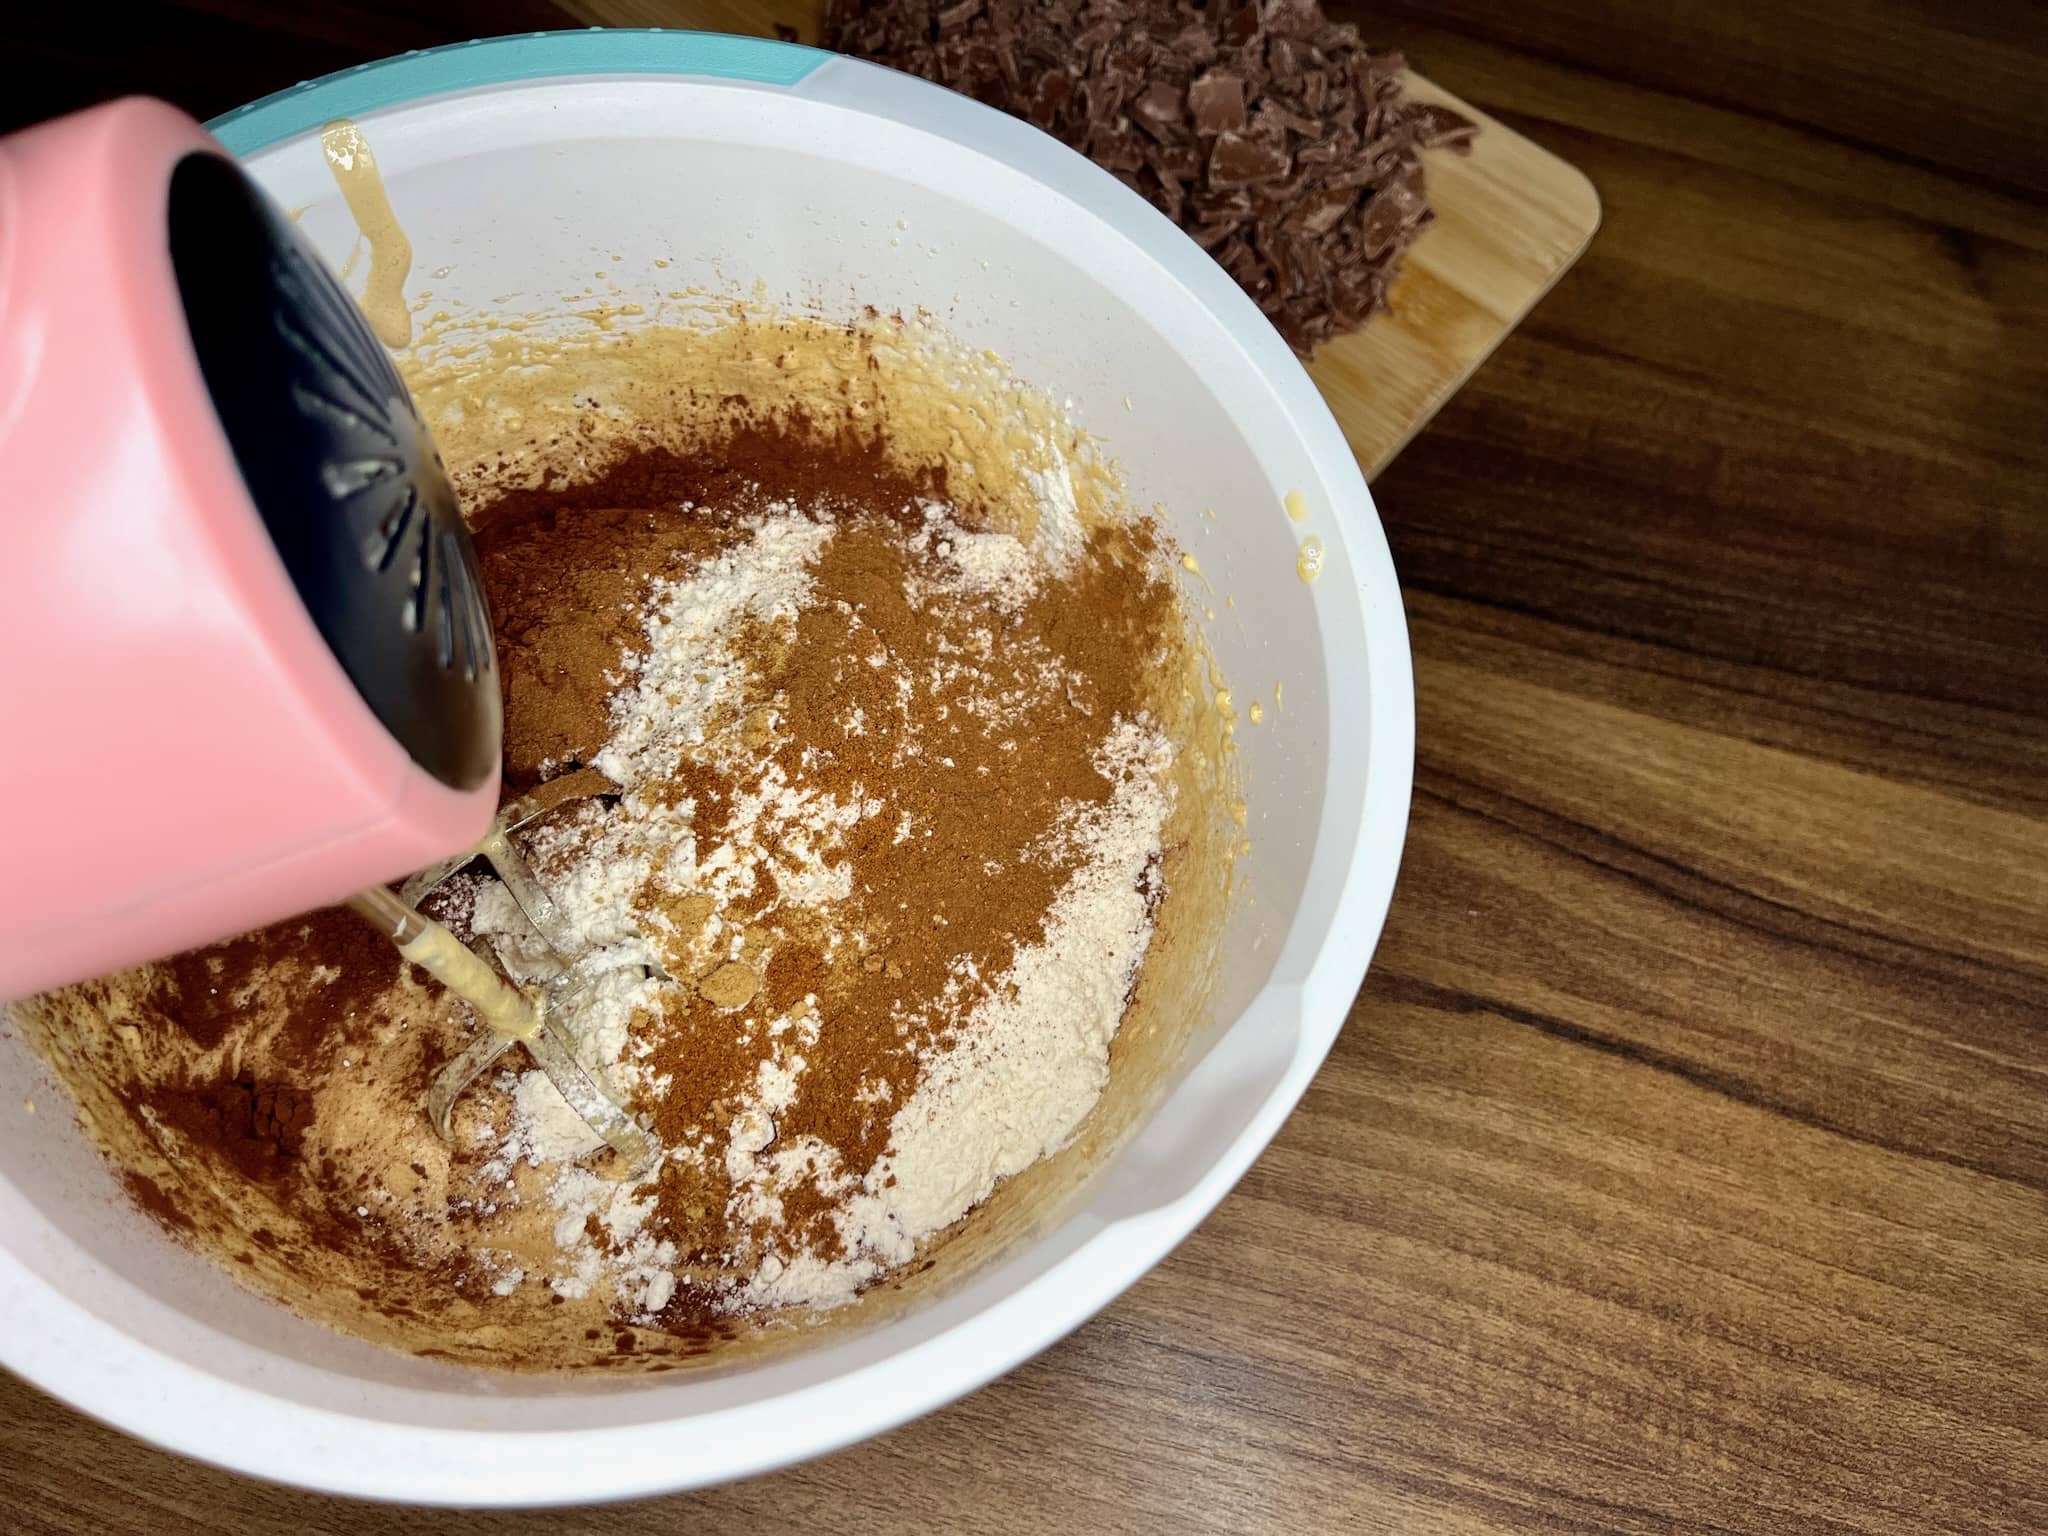 Gently mixing dry ingredients into the egg batter in a mixing bowl